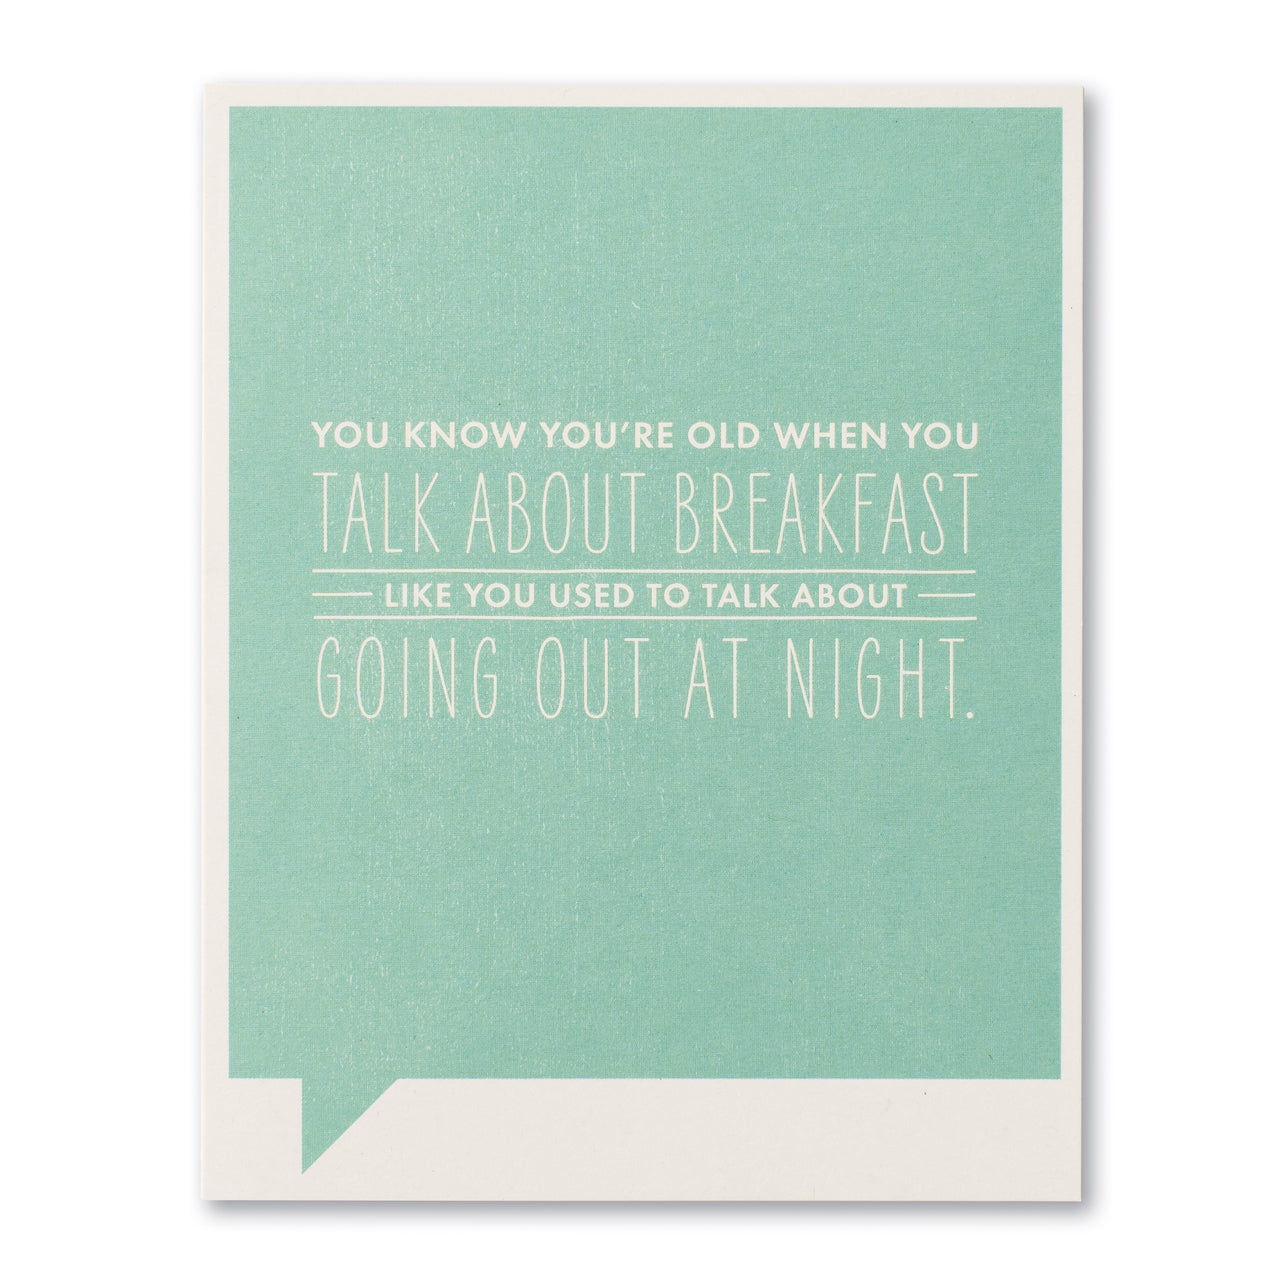 Frank and Funny Greeting Card - Birthday - You Know You're Old When You Talk About Breakfast Like You Used To Talk About Going Out At Night - Mellow Monkey